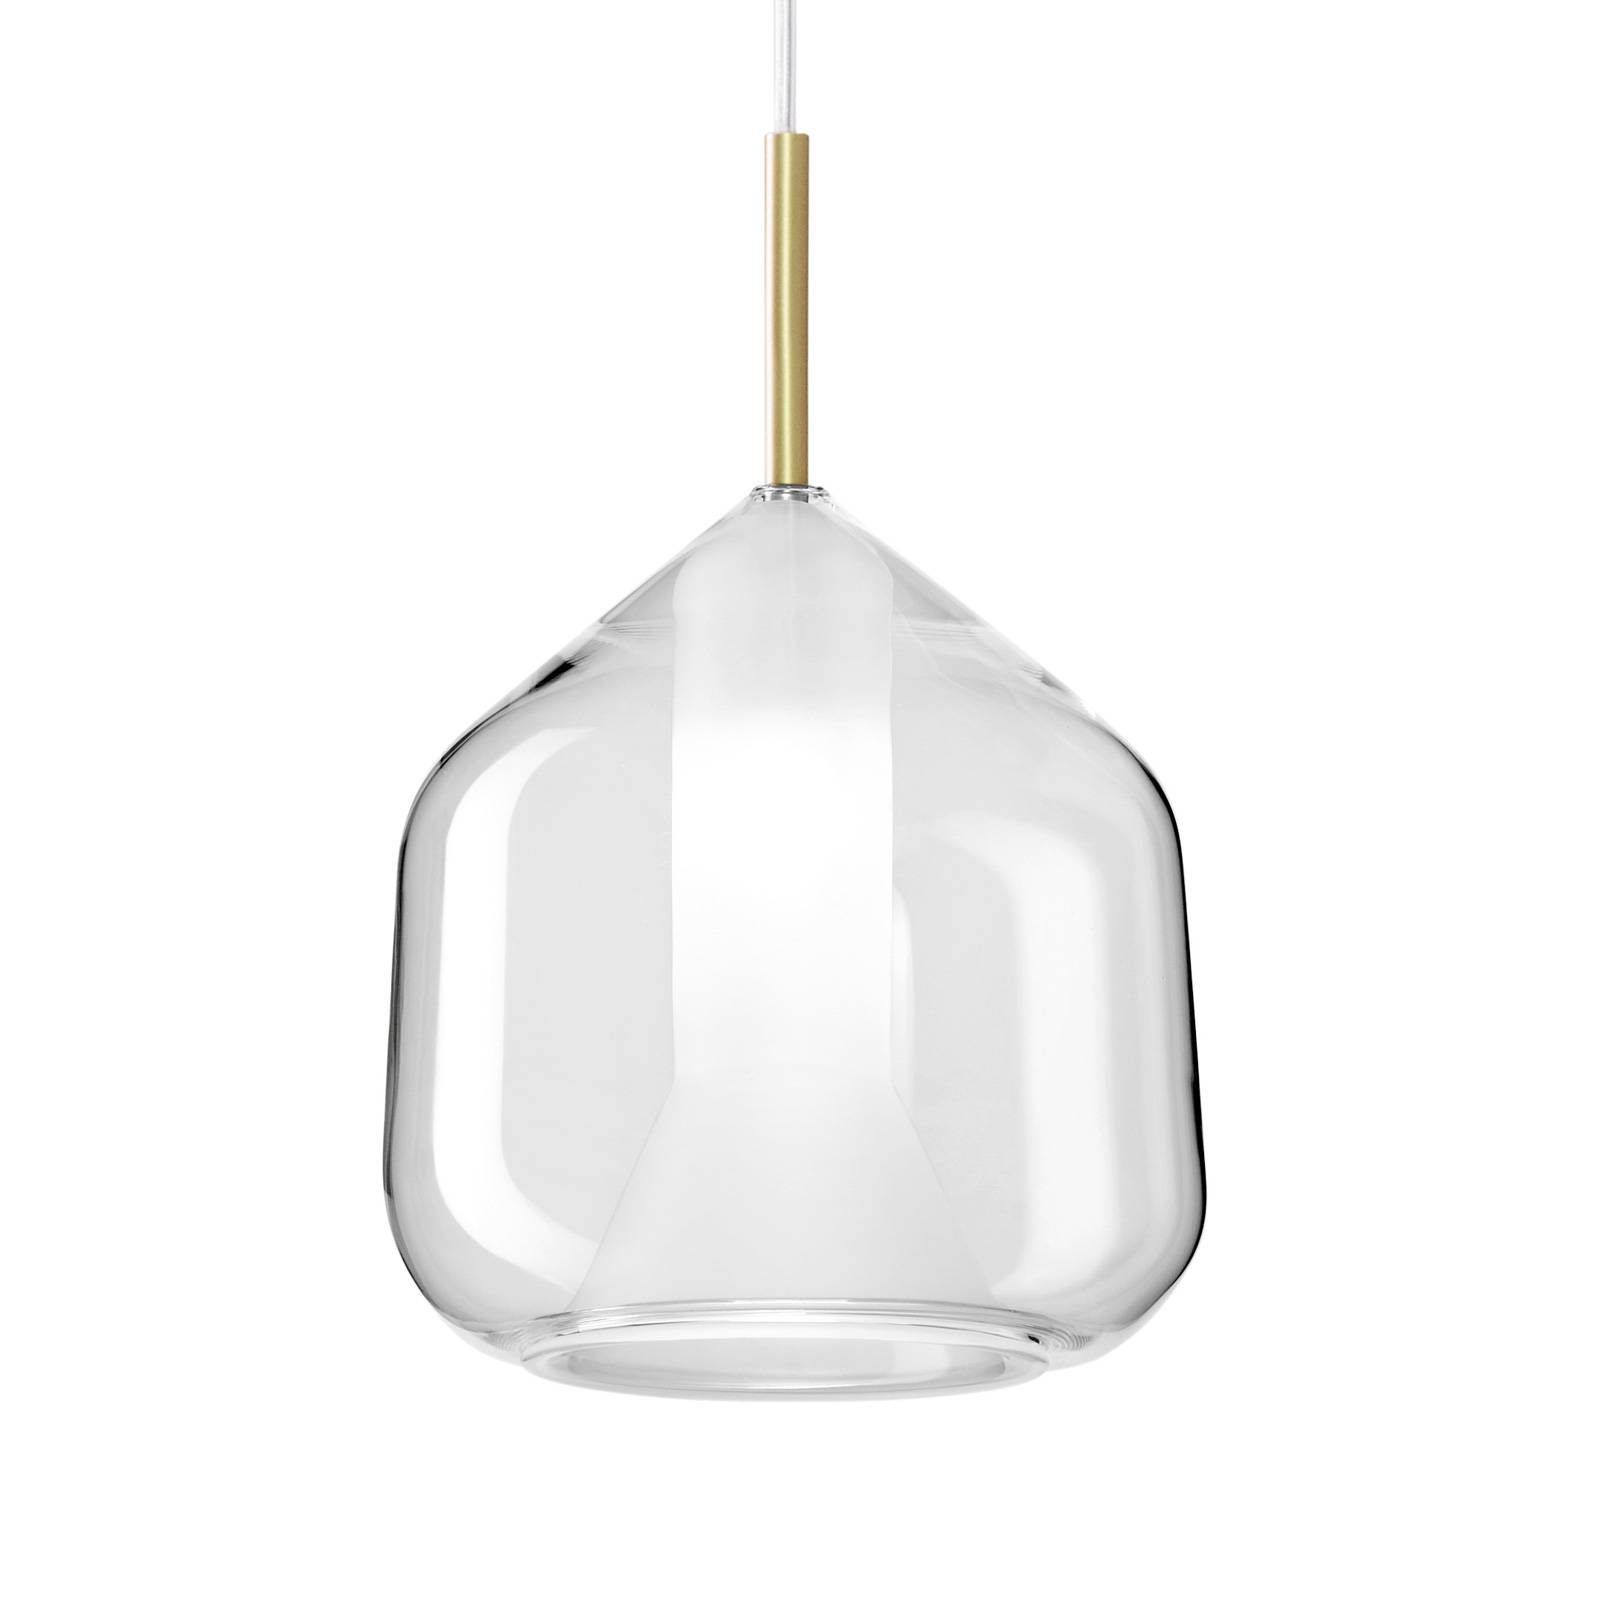 X-Ray hanging light, straight shape, clear